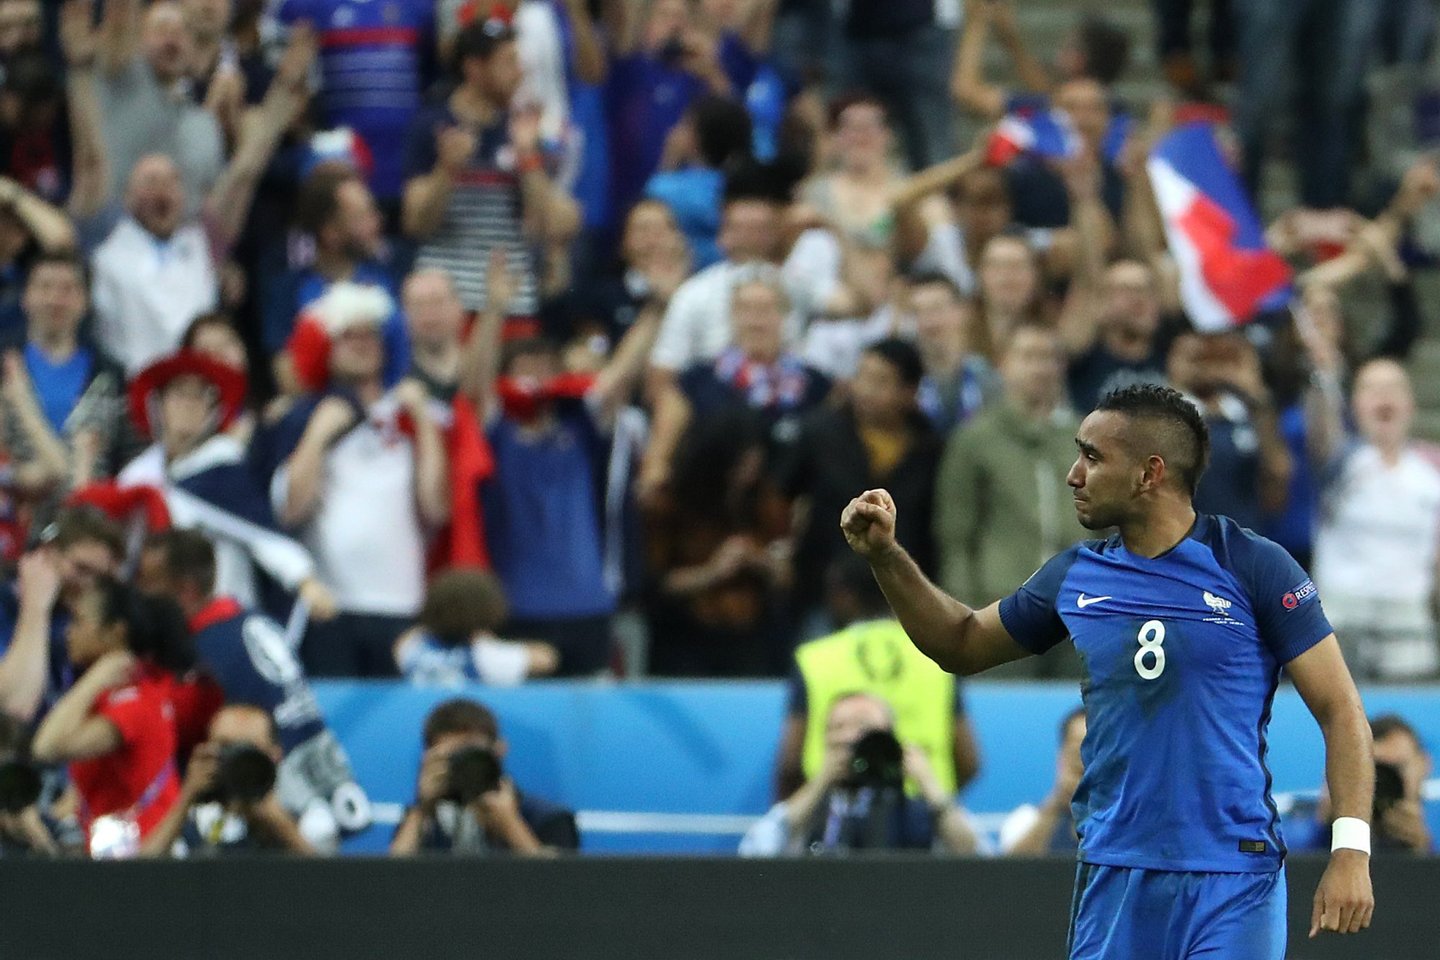 France's forward Dimitri Payet celebrates scoring France's second goal during the Euro 2016 group A football match between France and Romania at Stade de France, in Saint-Denis, north of Paris, on June 10, 2016. / AFP / KENZO TRIBOUILLARD (Photo credit should read KENZO TRIBOUILLARD/AFP/Getty Images)